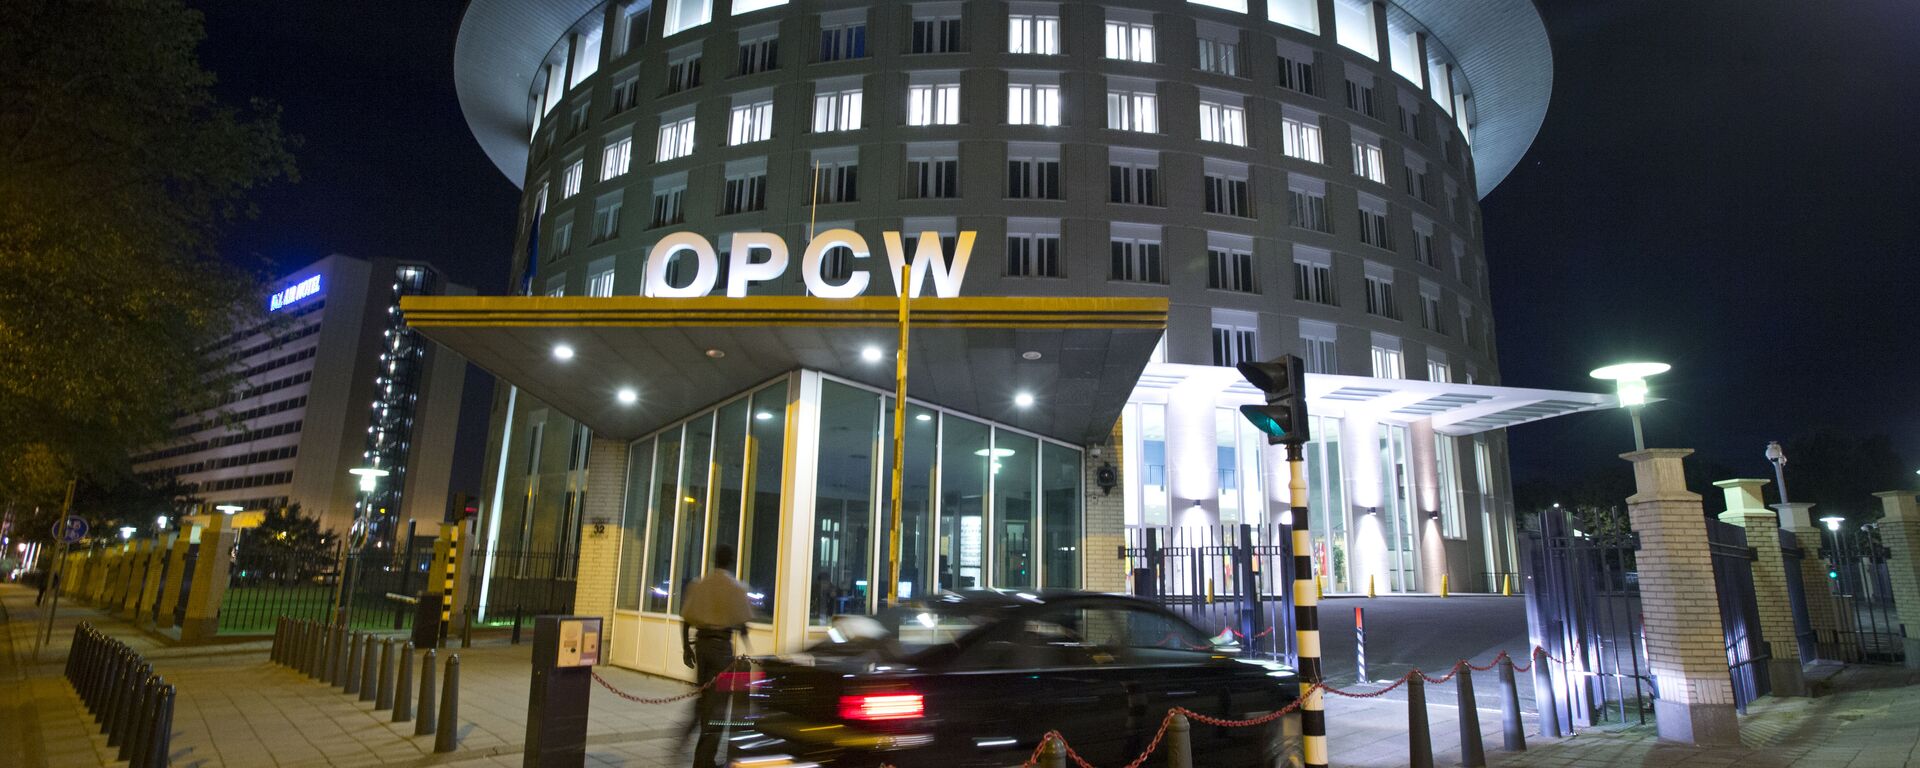 A car arrives at the headquarters of the Organization for the Prohibition of Chemical Weapons, OPCW, in The Hague, Netherlands. - Sputnik International, 1920, 07.11.2022